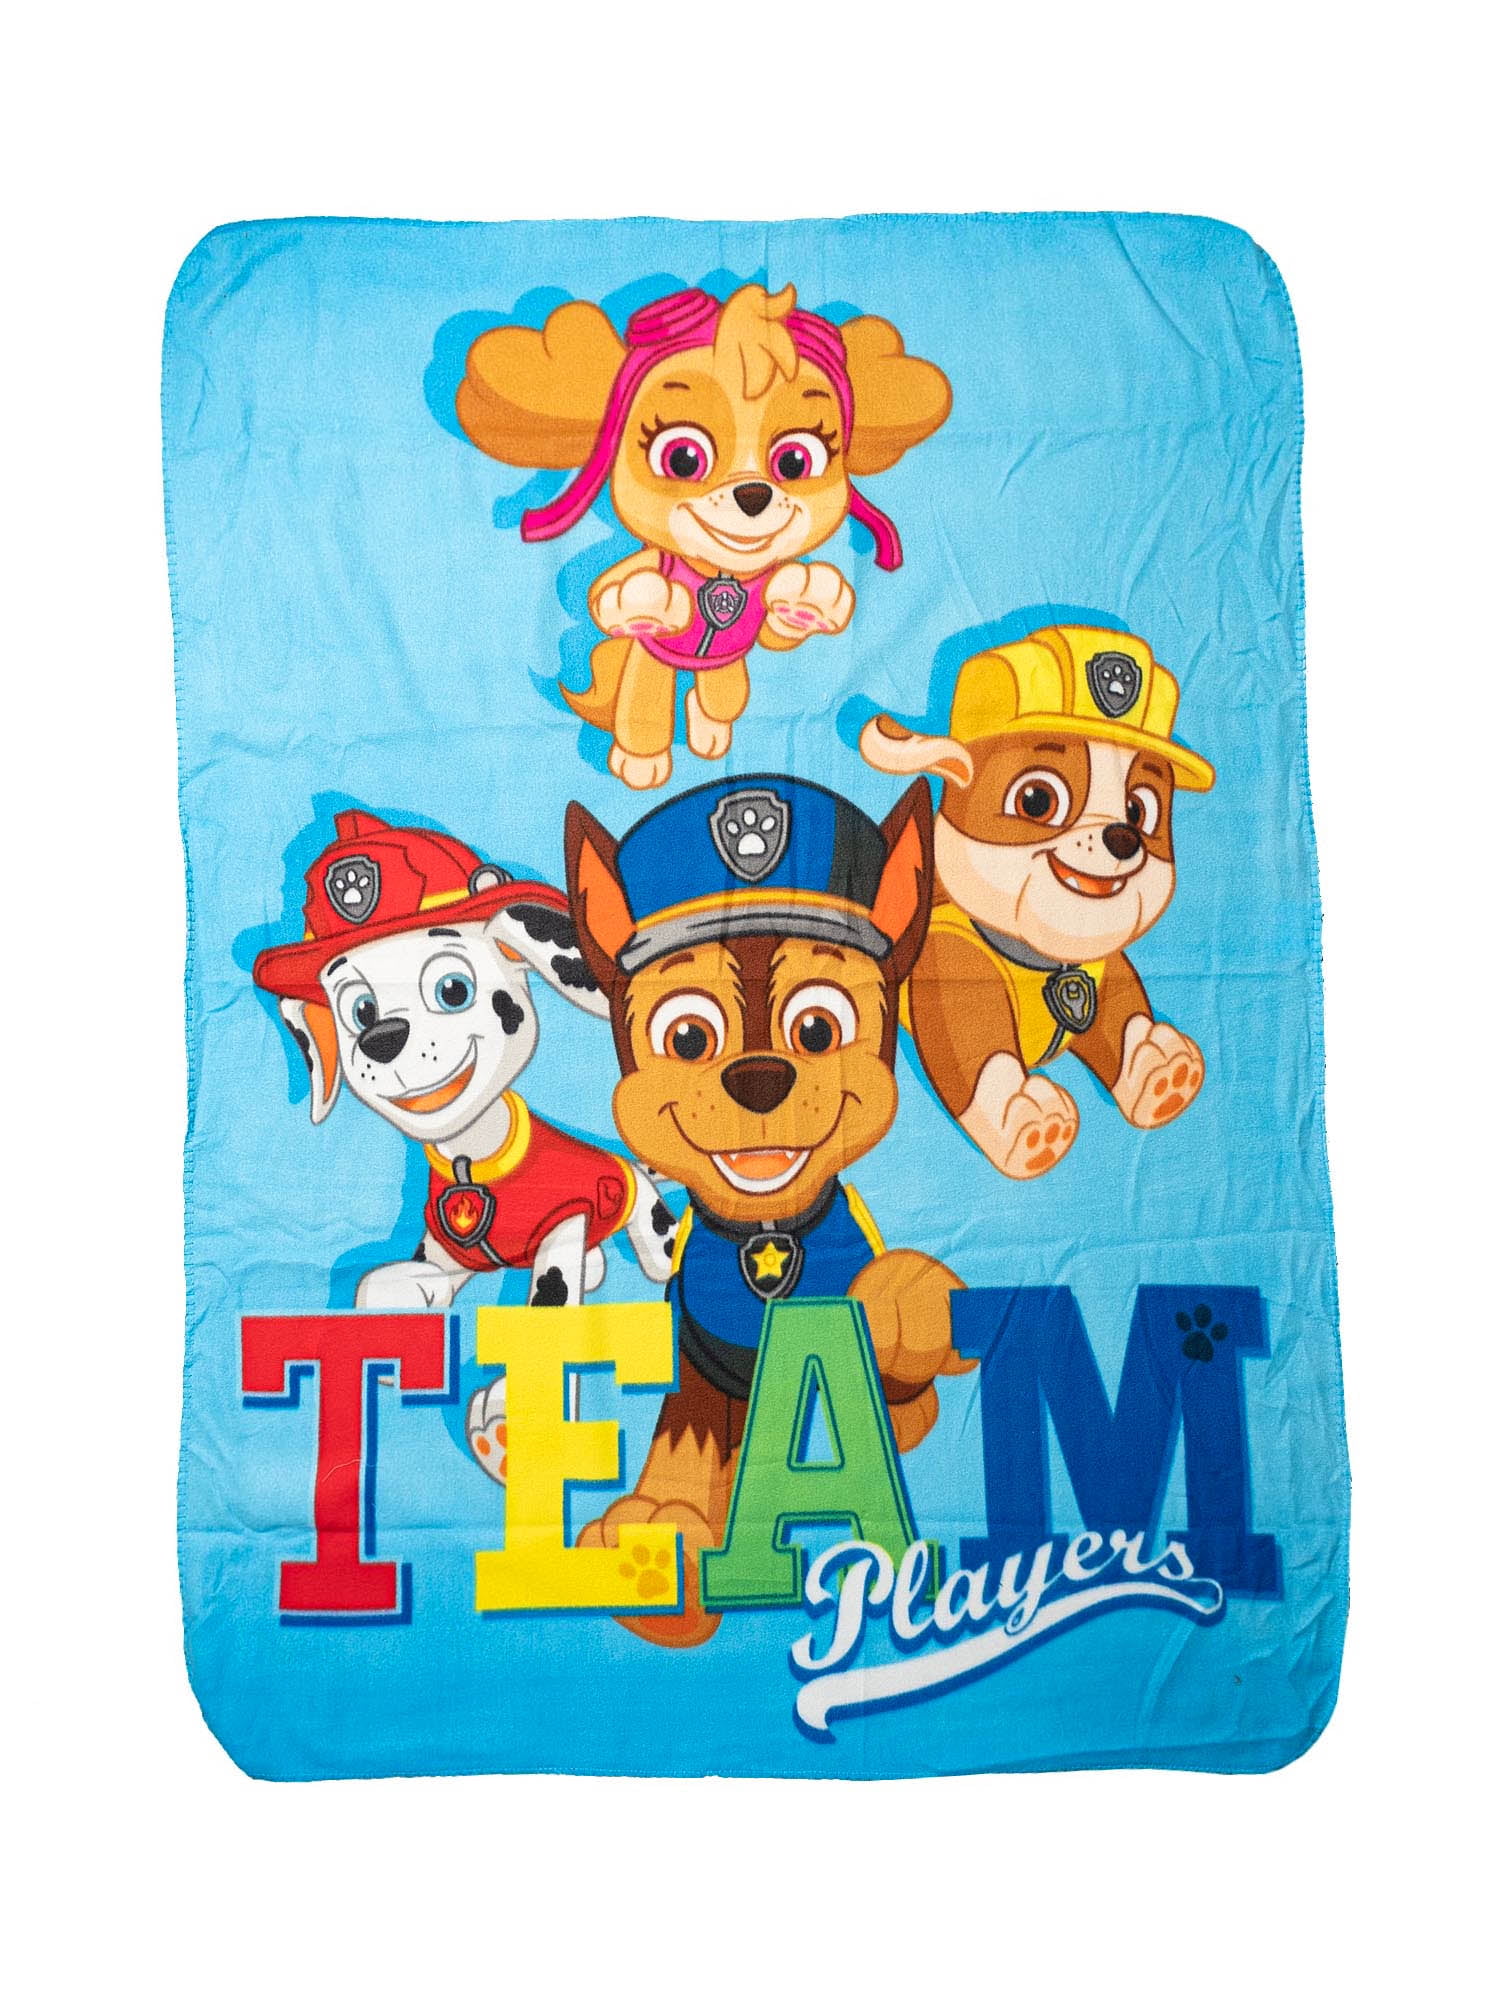 Paw Patrol Blanket Soft Touch Fleece Plaid Blanket Official Licenced 